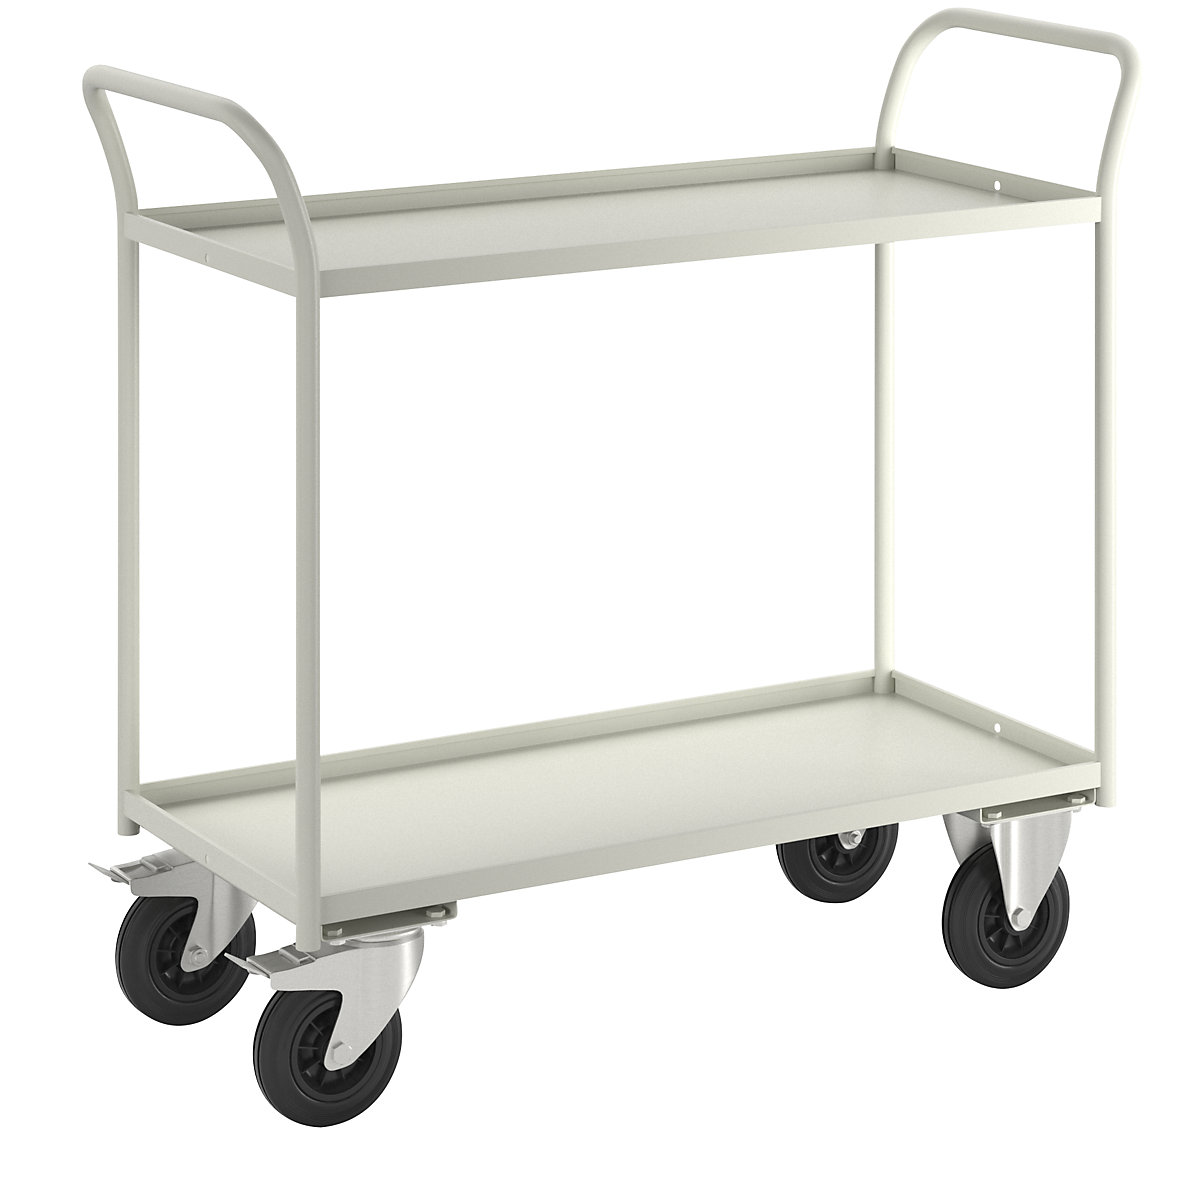 KM41 table trolley – Kongamek, 2 shelves with raised edges, LxWxH 1080 x 450 x 1000 mm, white, 2 swivel castors with stops, 2 fixed castors-7